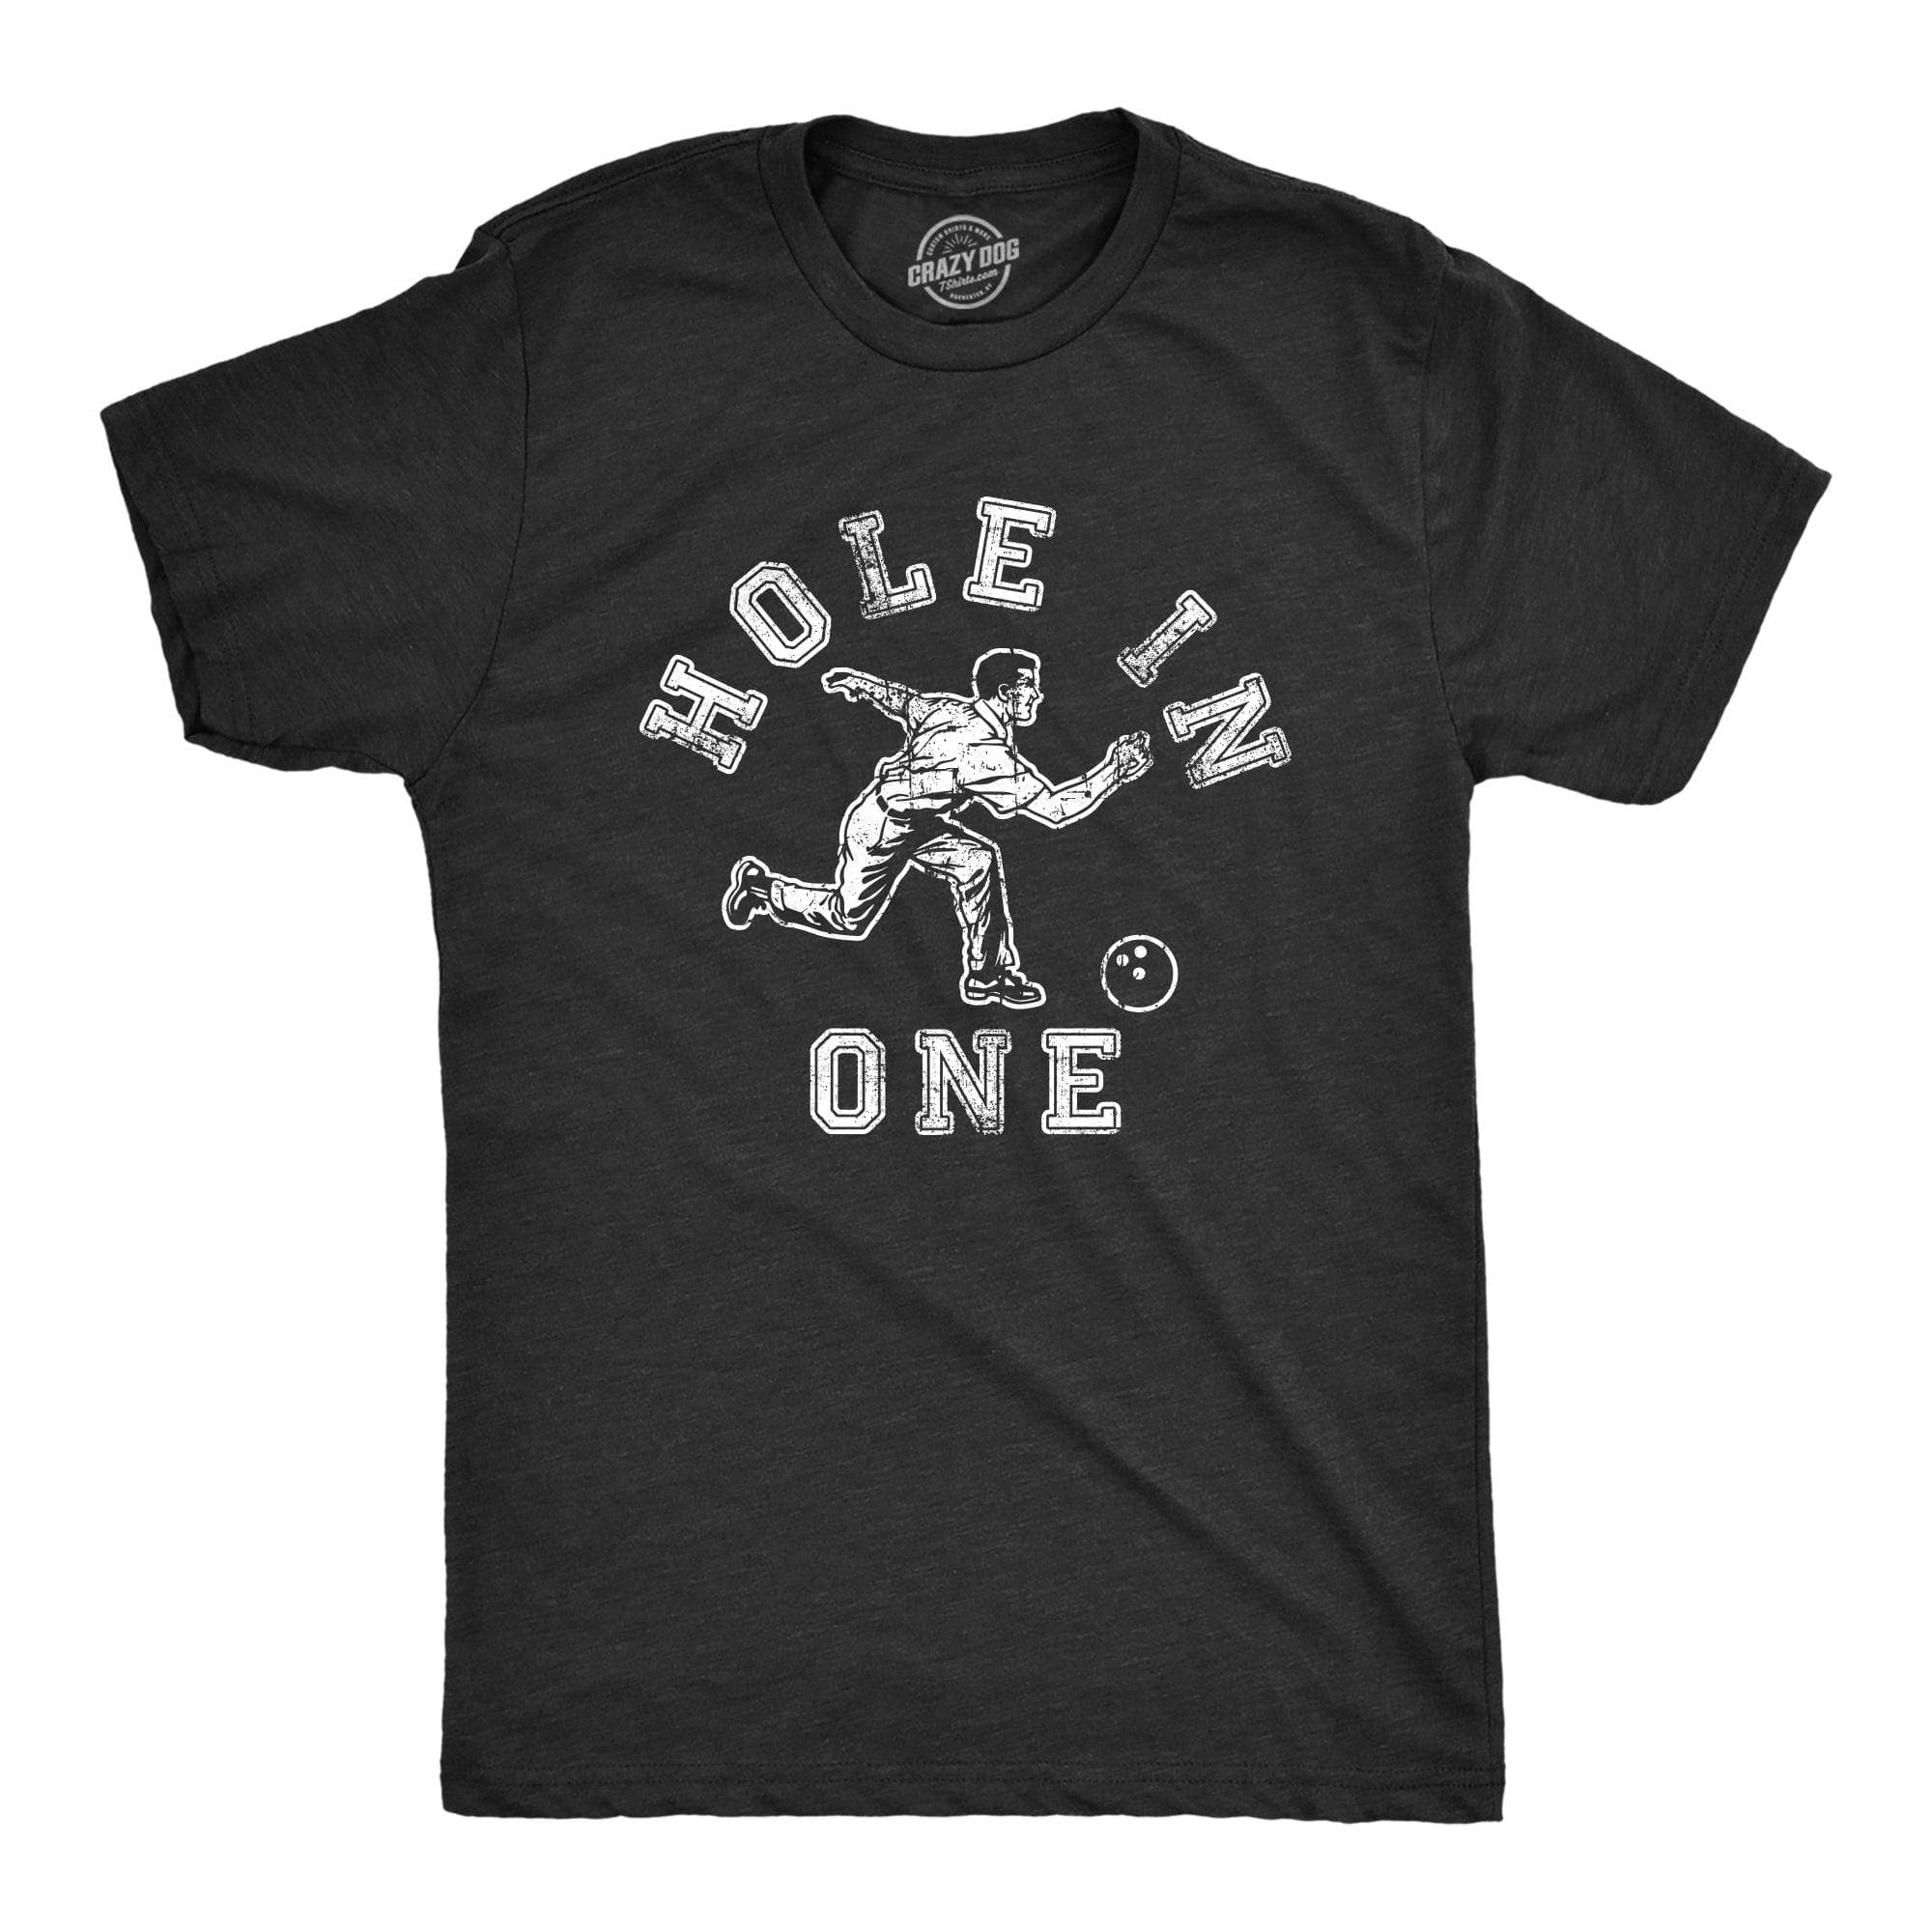 Hole In One Bowling Men's Tshirt  -  Crazy Dog T-Shirts